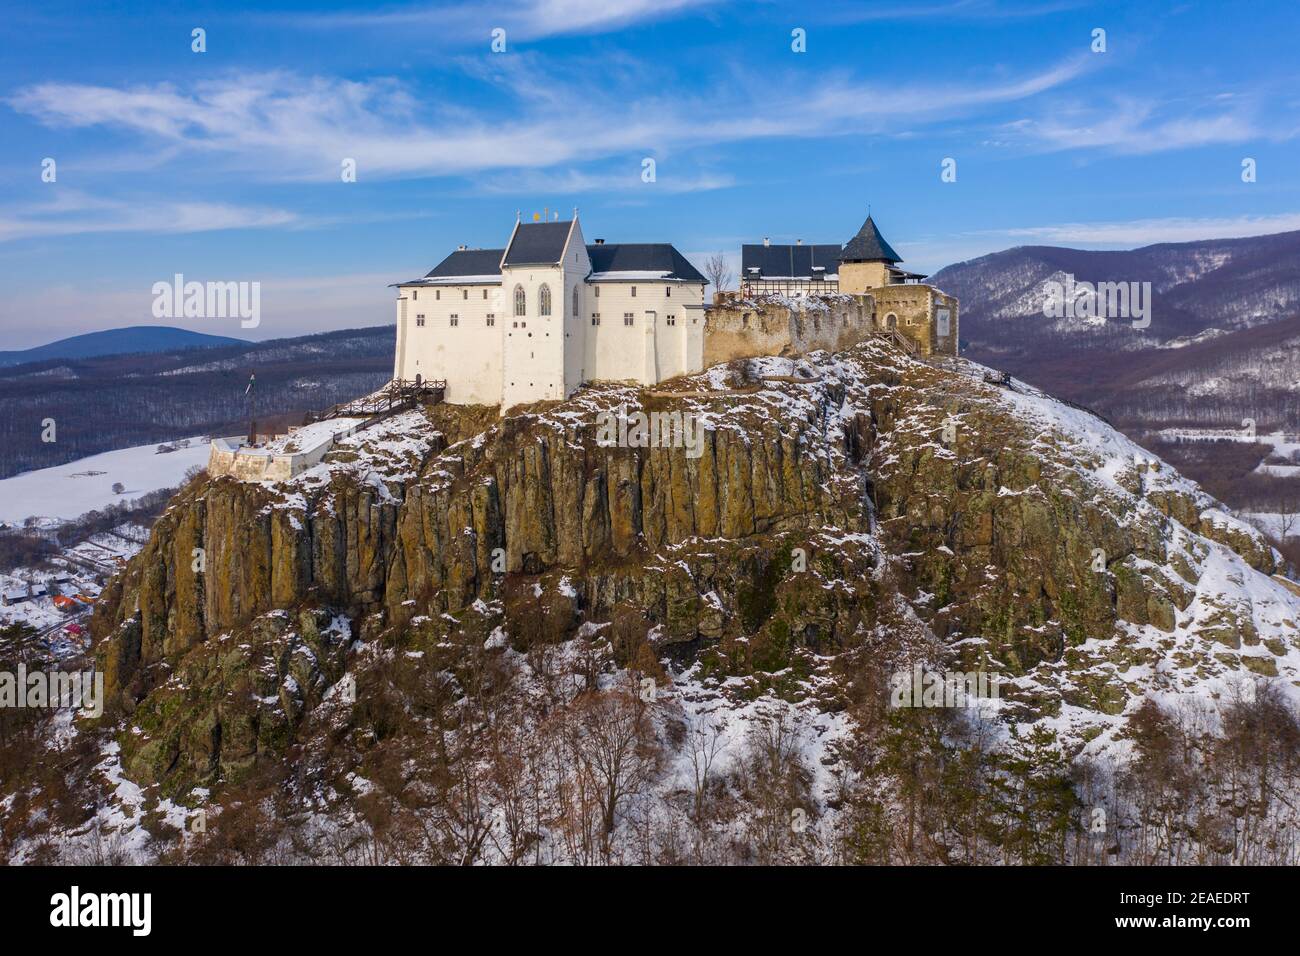 Füzér, Hungary - Aerial view of the famous castle of Fuzer built on a volcanic hill named Nagy-Milic. Zemplen mountains at the background. Stock Photo